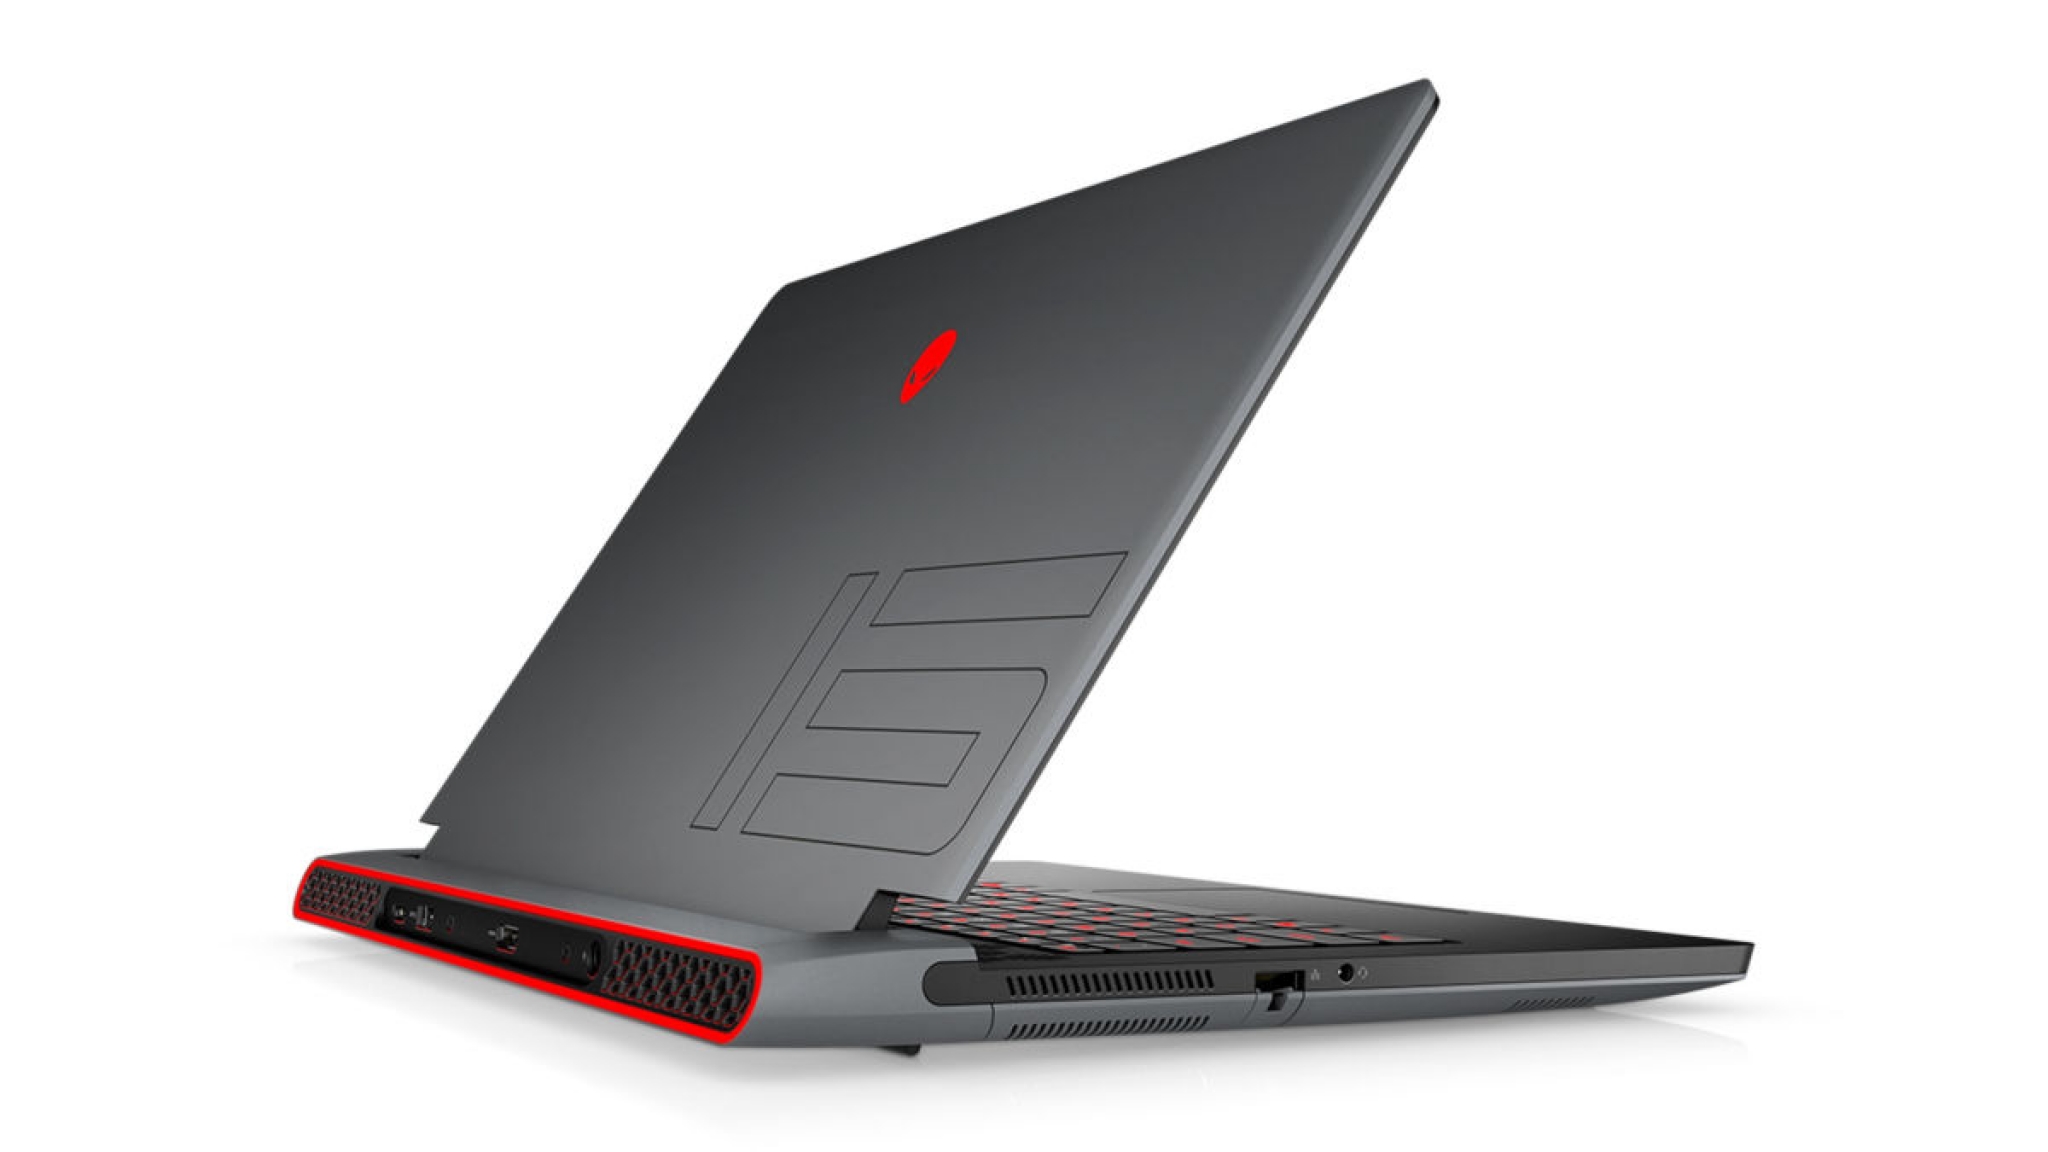 Alienware Finally Embraces Ryzen With Its First AMD-Powered Gaming Laptop in Over a Decade